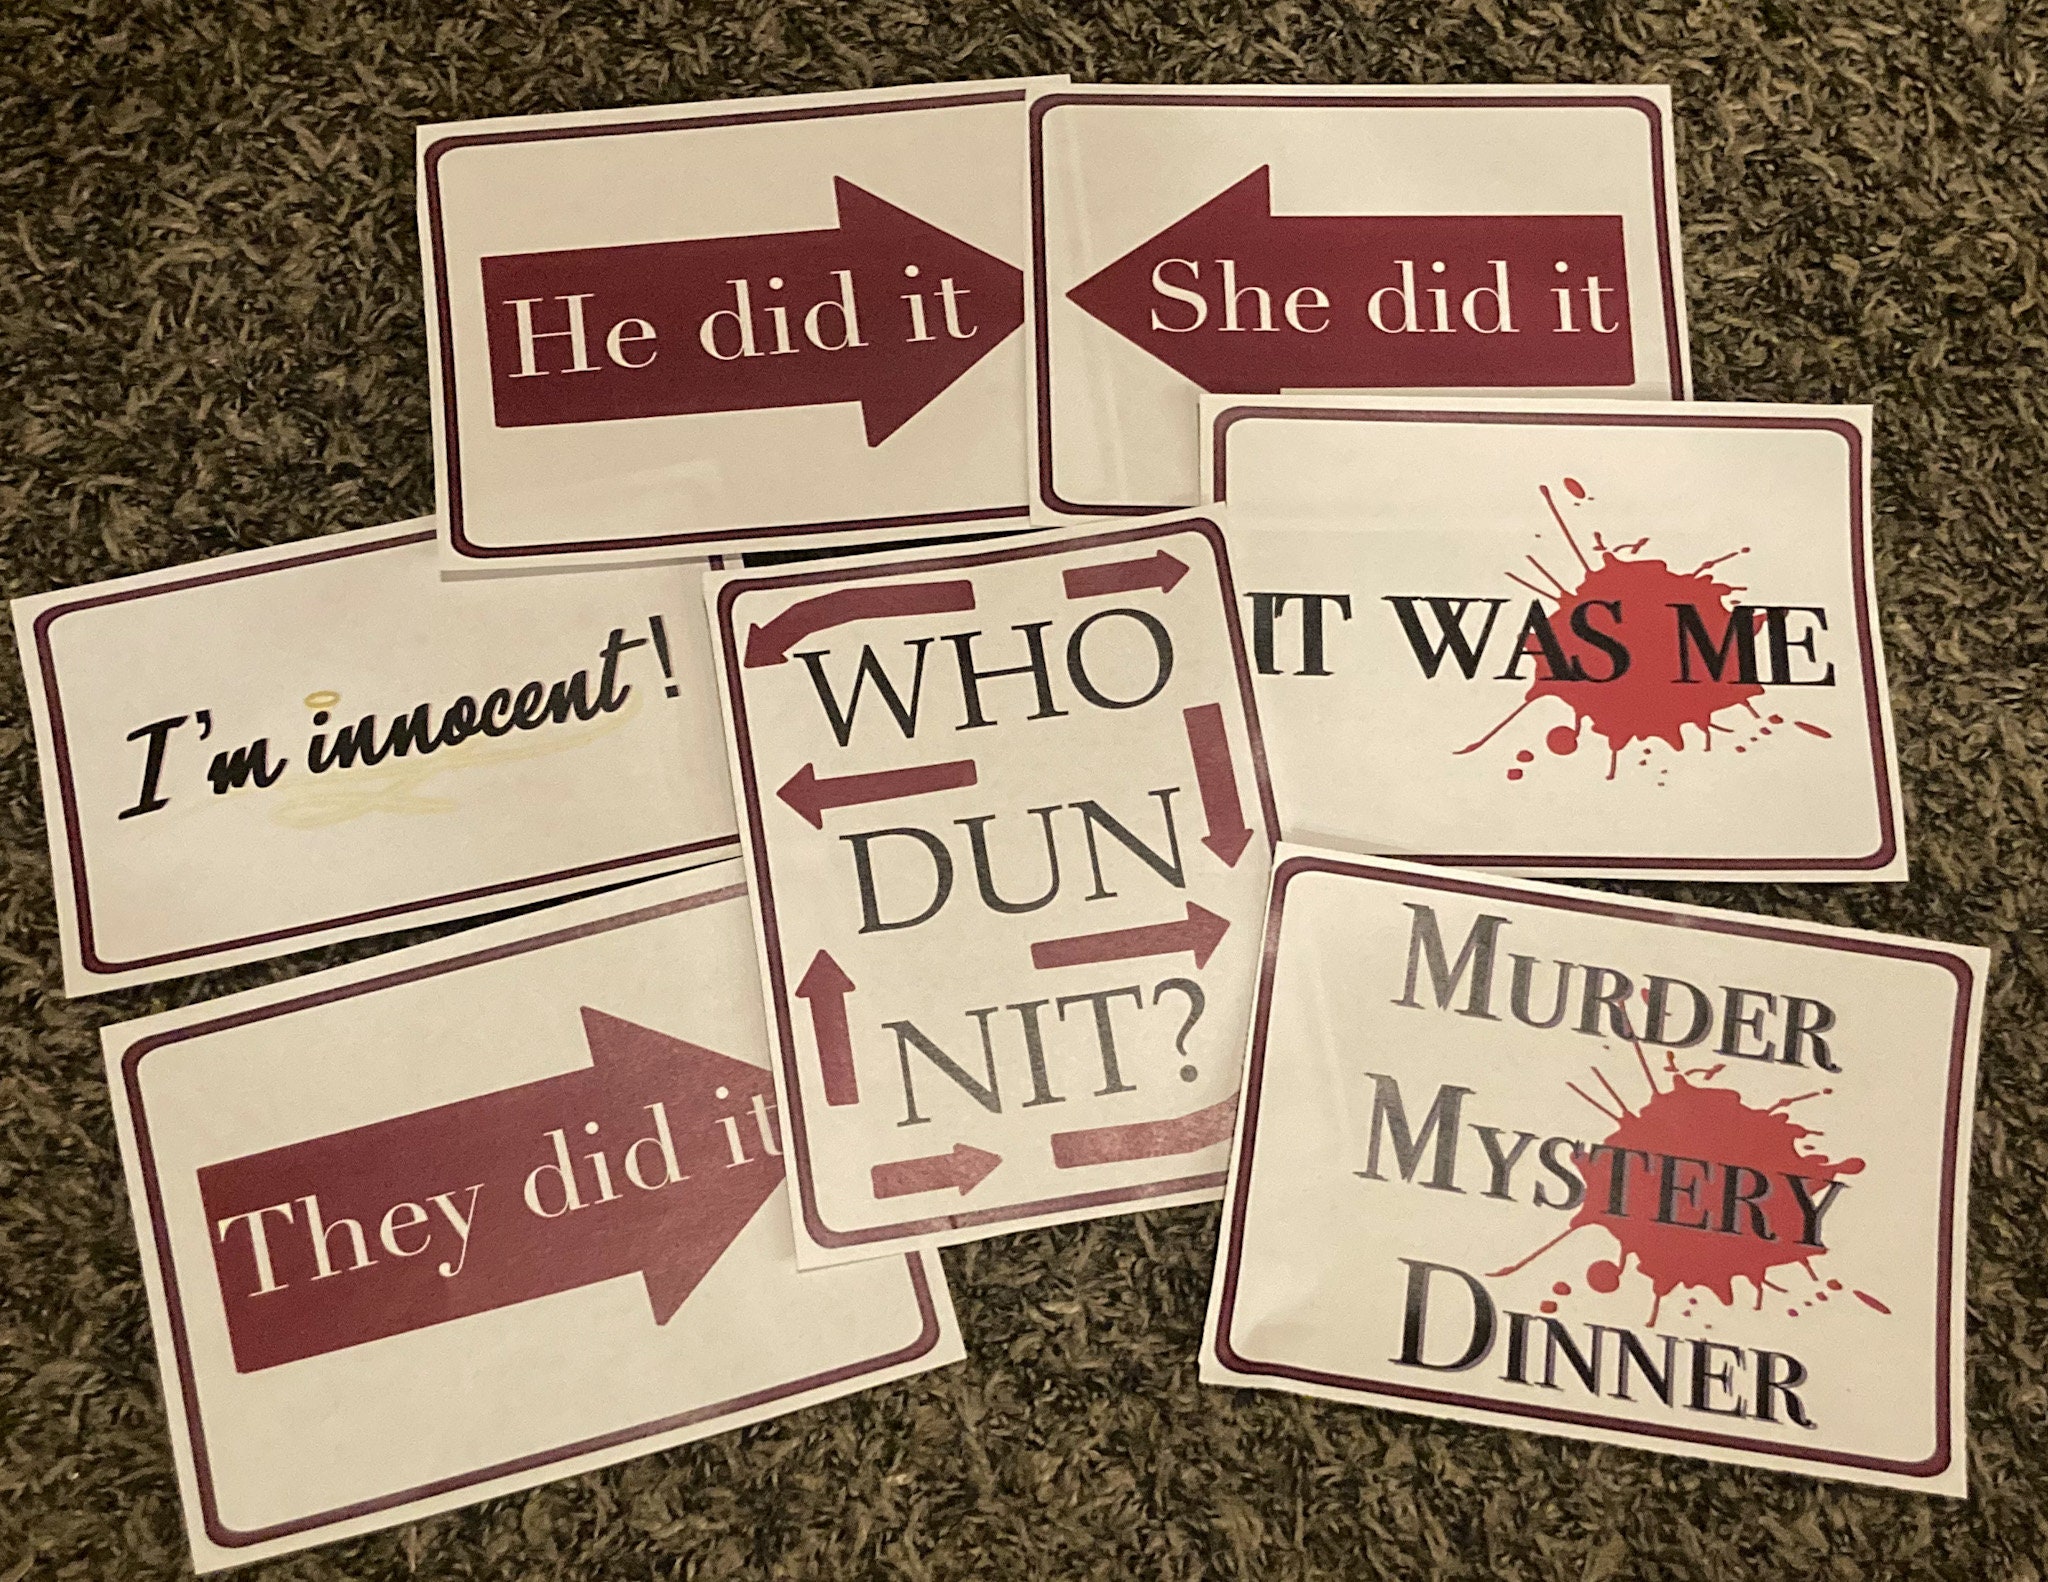 Get Together “Murder Mystery on the Night Train” Board Game - The Board  Classic